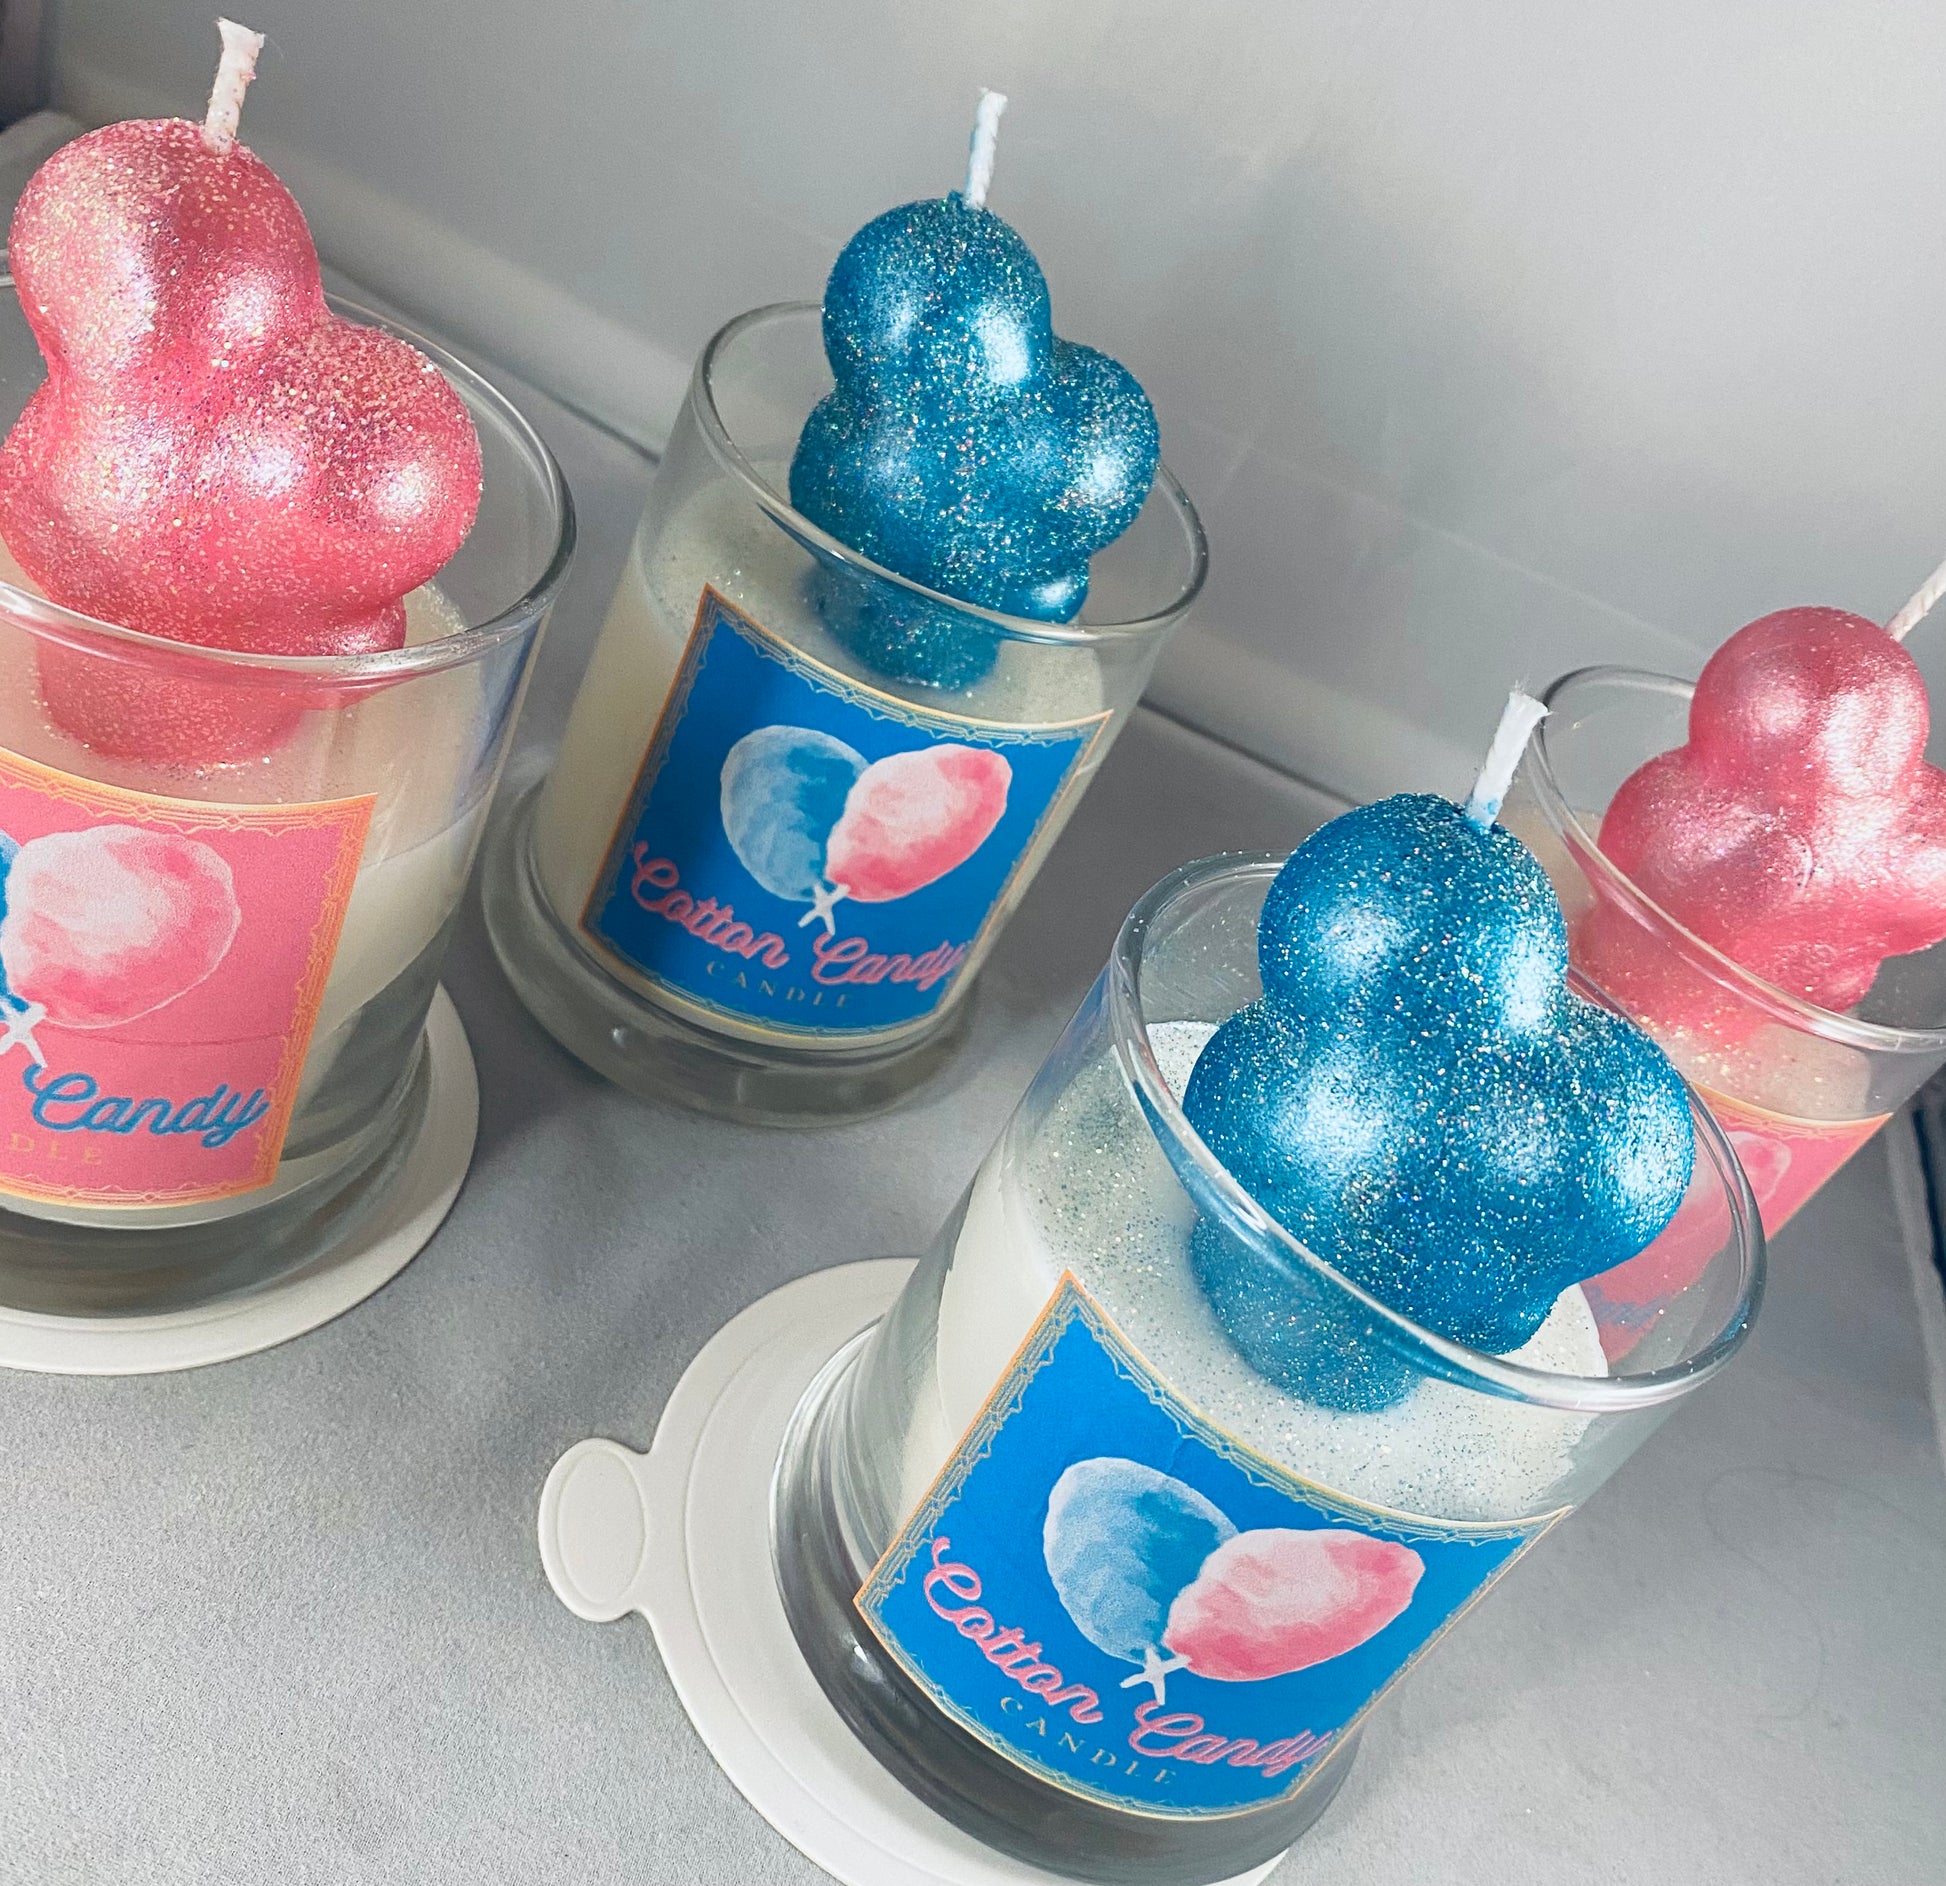 Cotton Candy Candles – Sand Hill Candles & melts